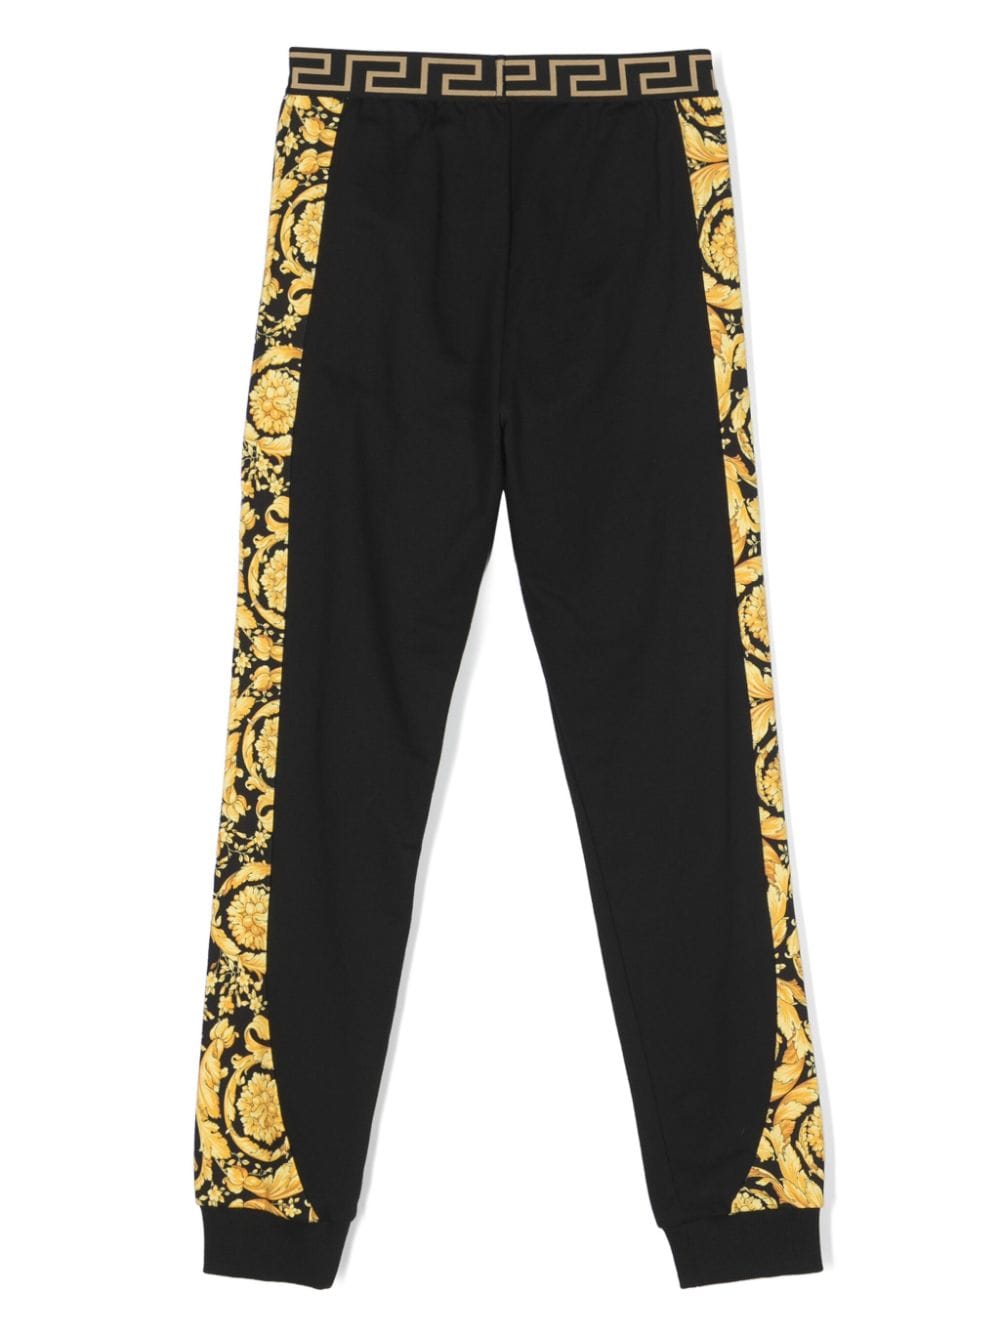 Baroque print sports trousers